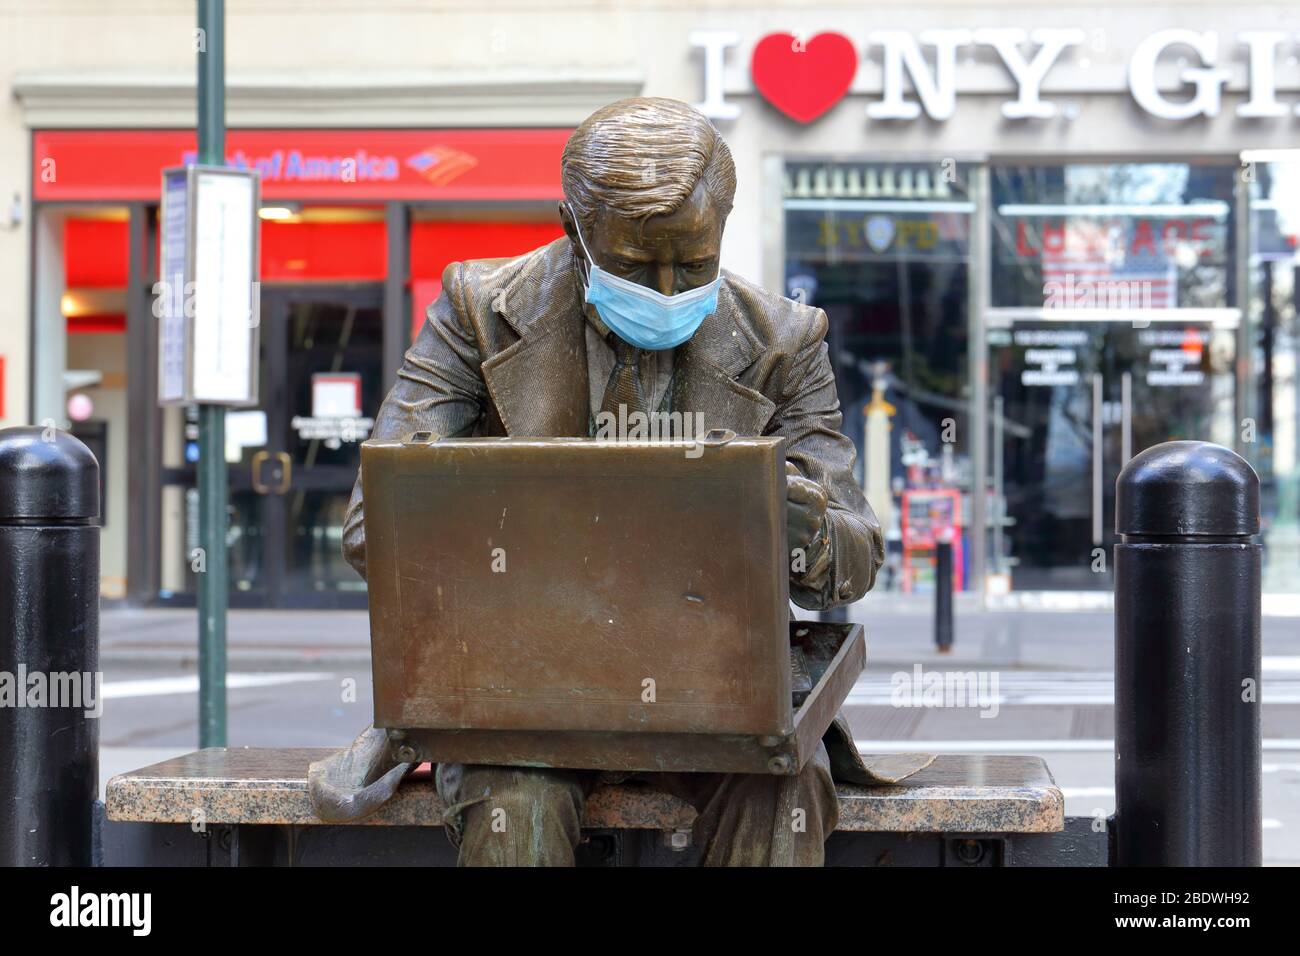 The 'Double Check' businessman statue with a face mask as a symbol of the current coronavirus COVID-19 pandemic in New York, NY. Stock Photo